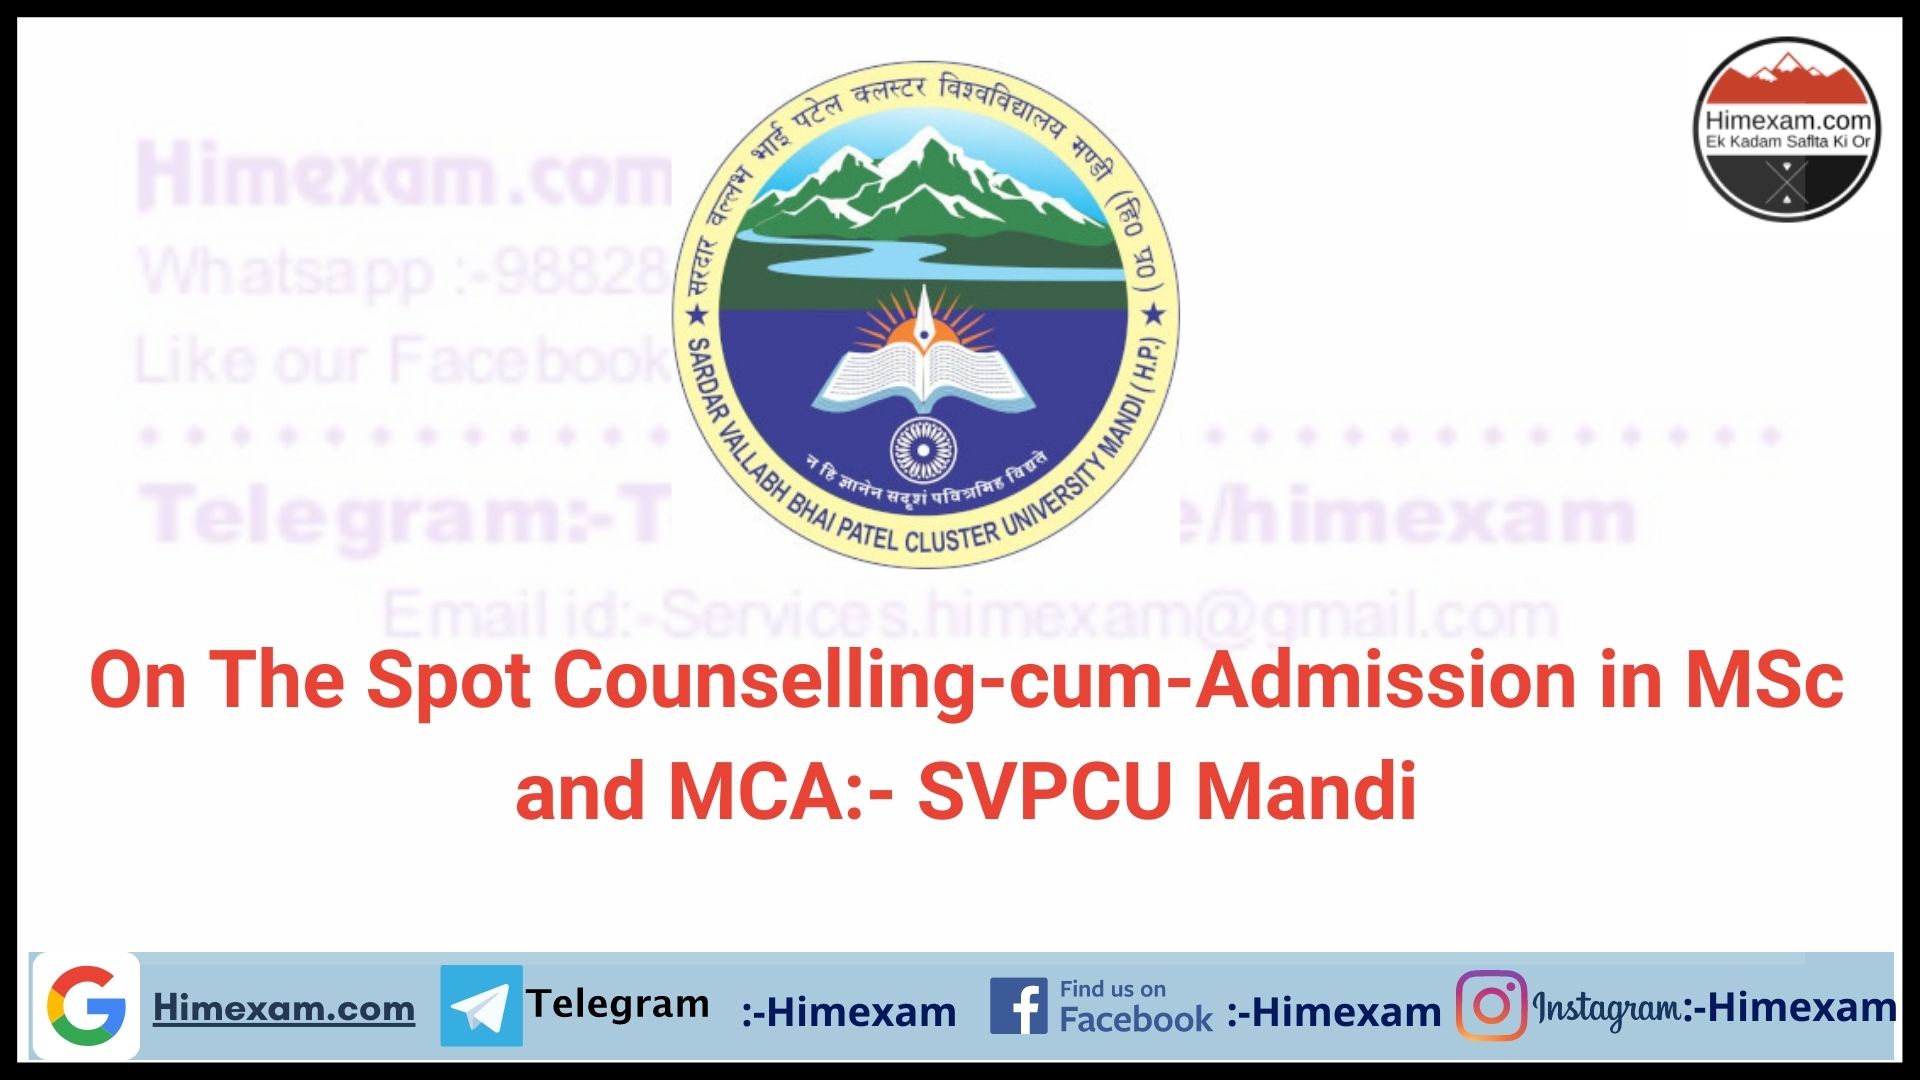 On The Spot Counselling-cum-Admission in MSc and MCA:- SVPCU Mandi